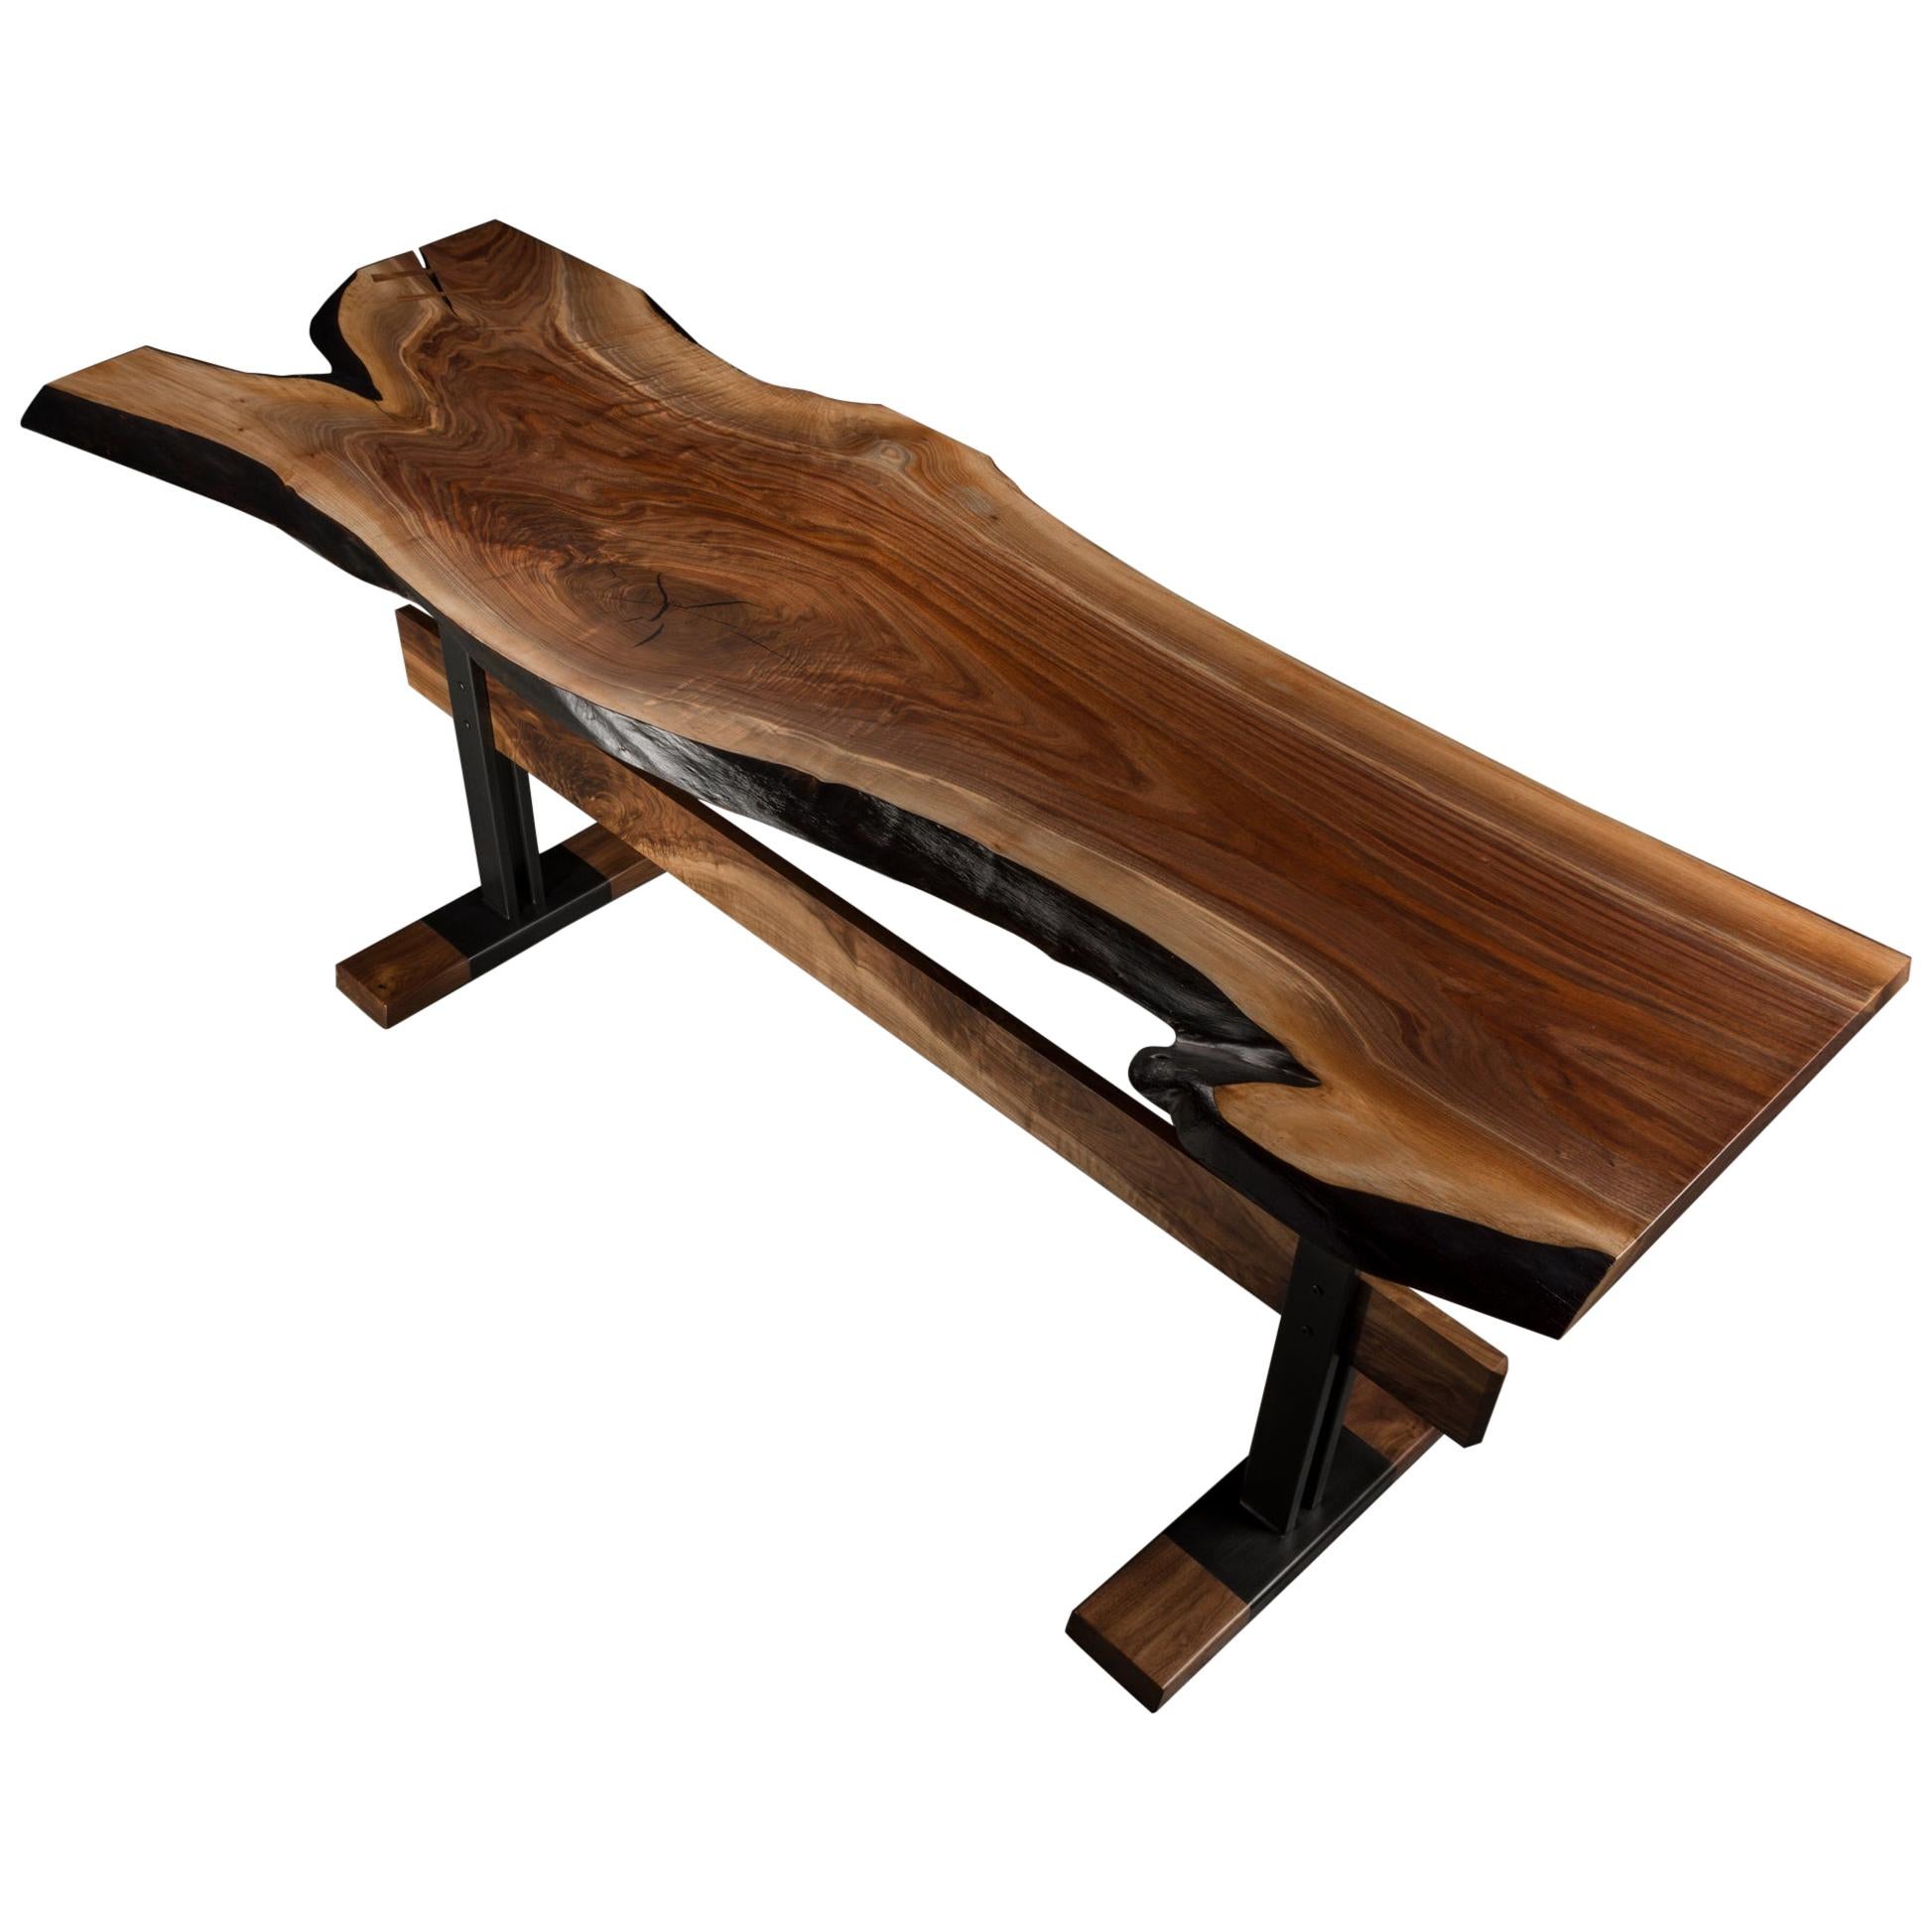 Live Edge Walnut Console Table on Black Steel Base "Cadieux Table"